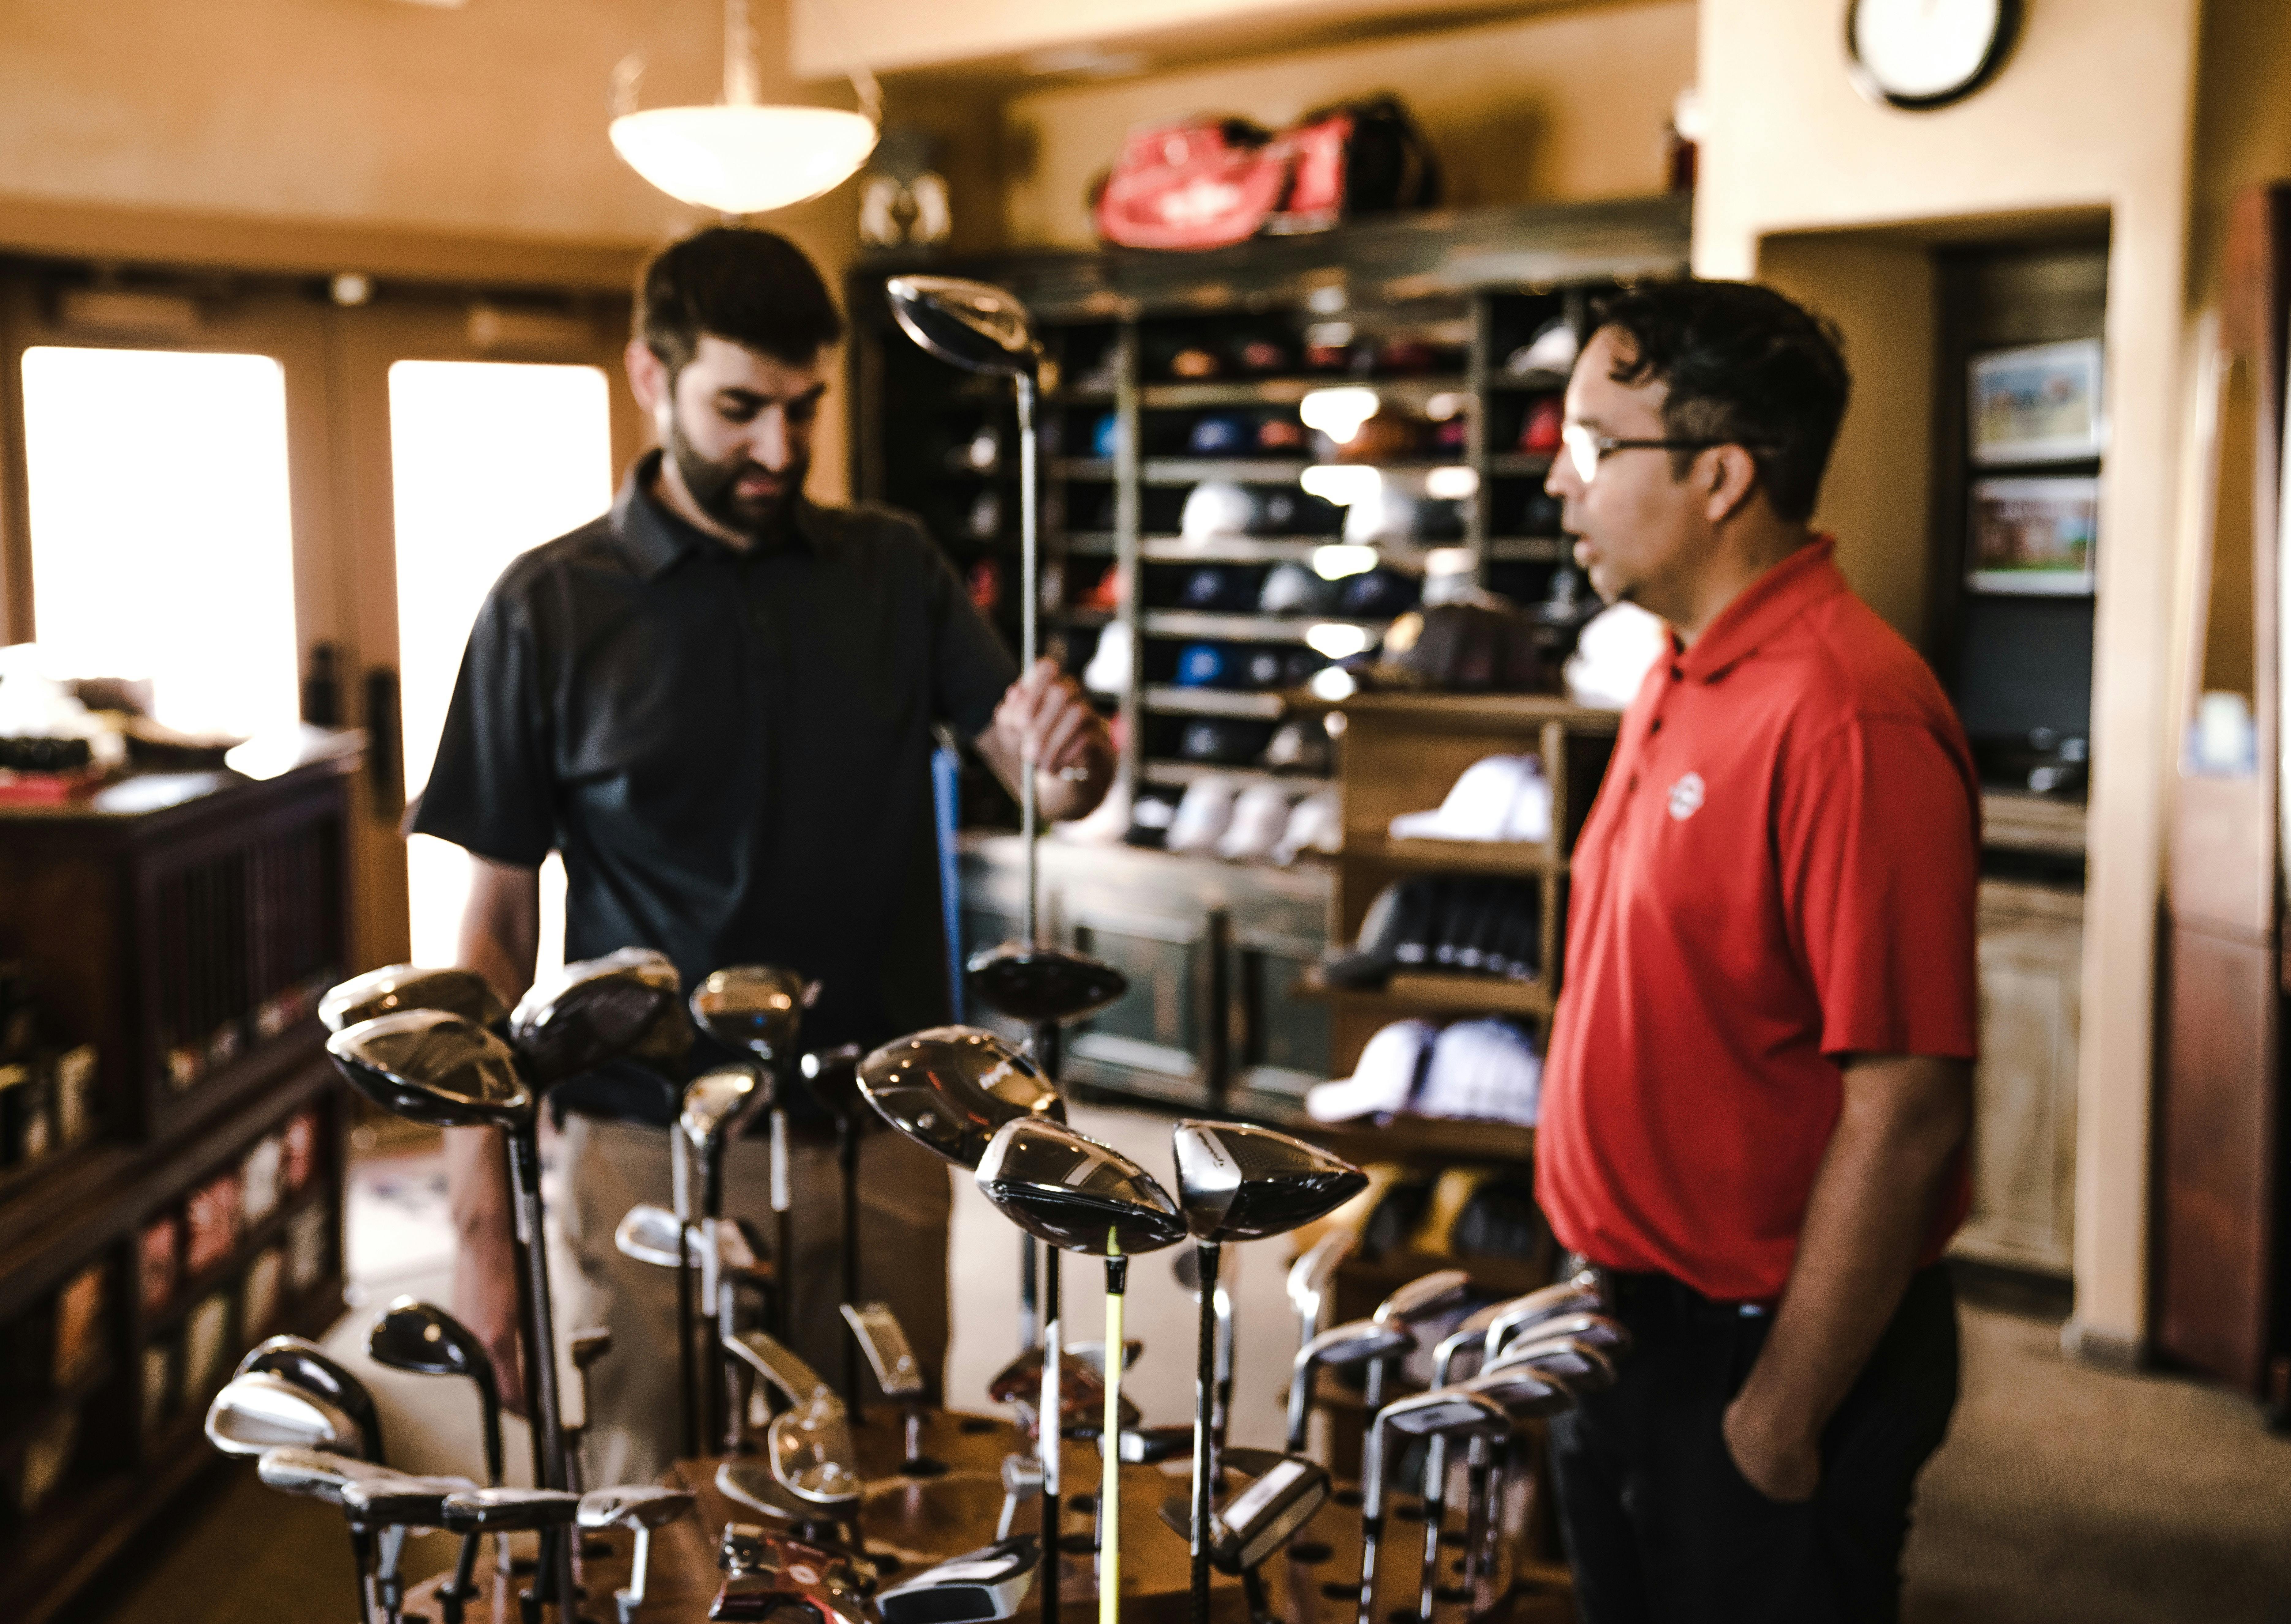 Two men examine golf clubs in a golf shop